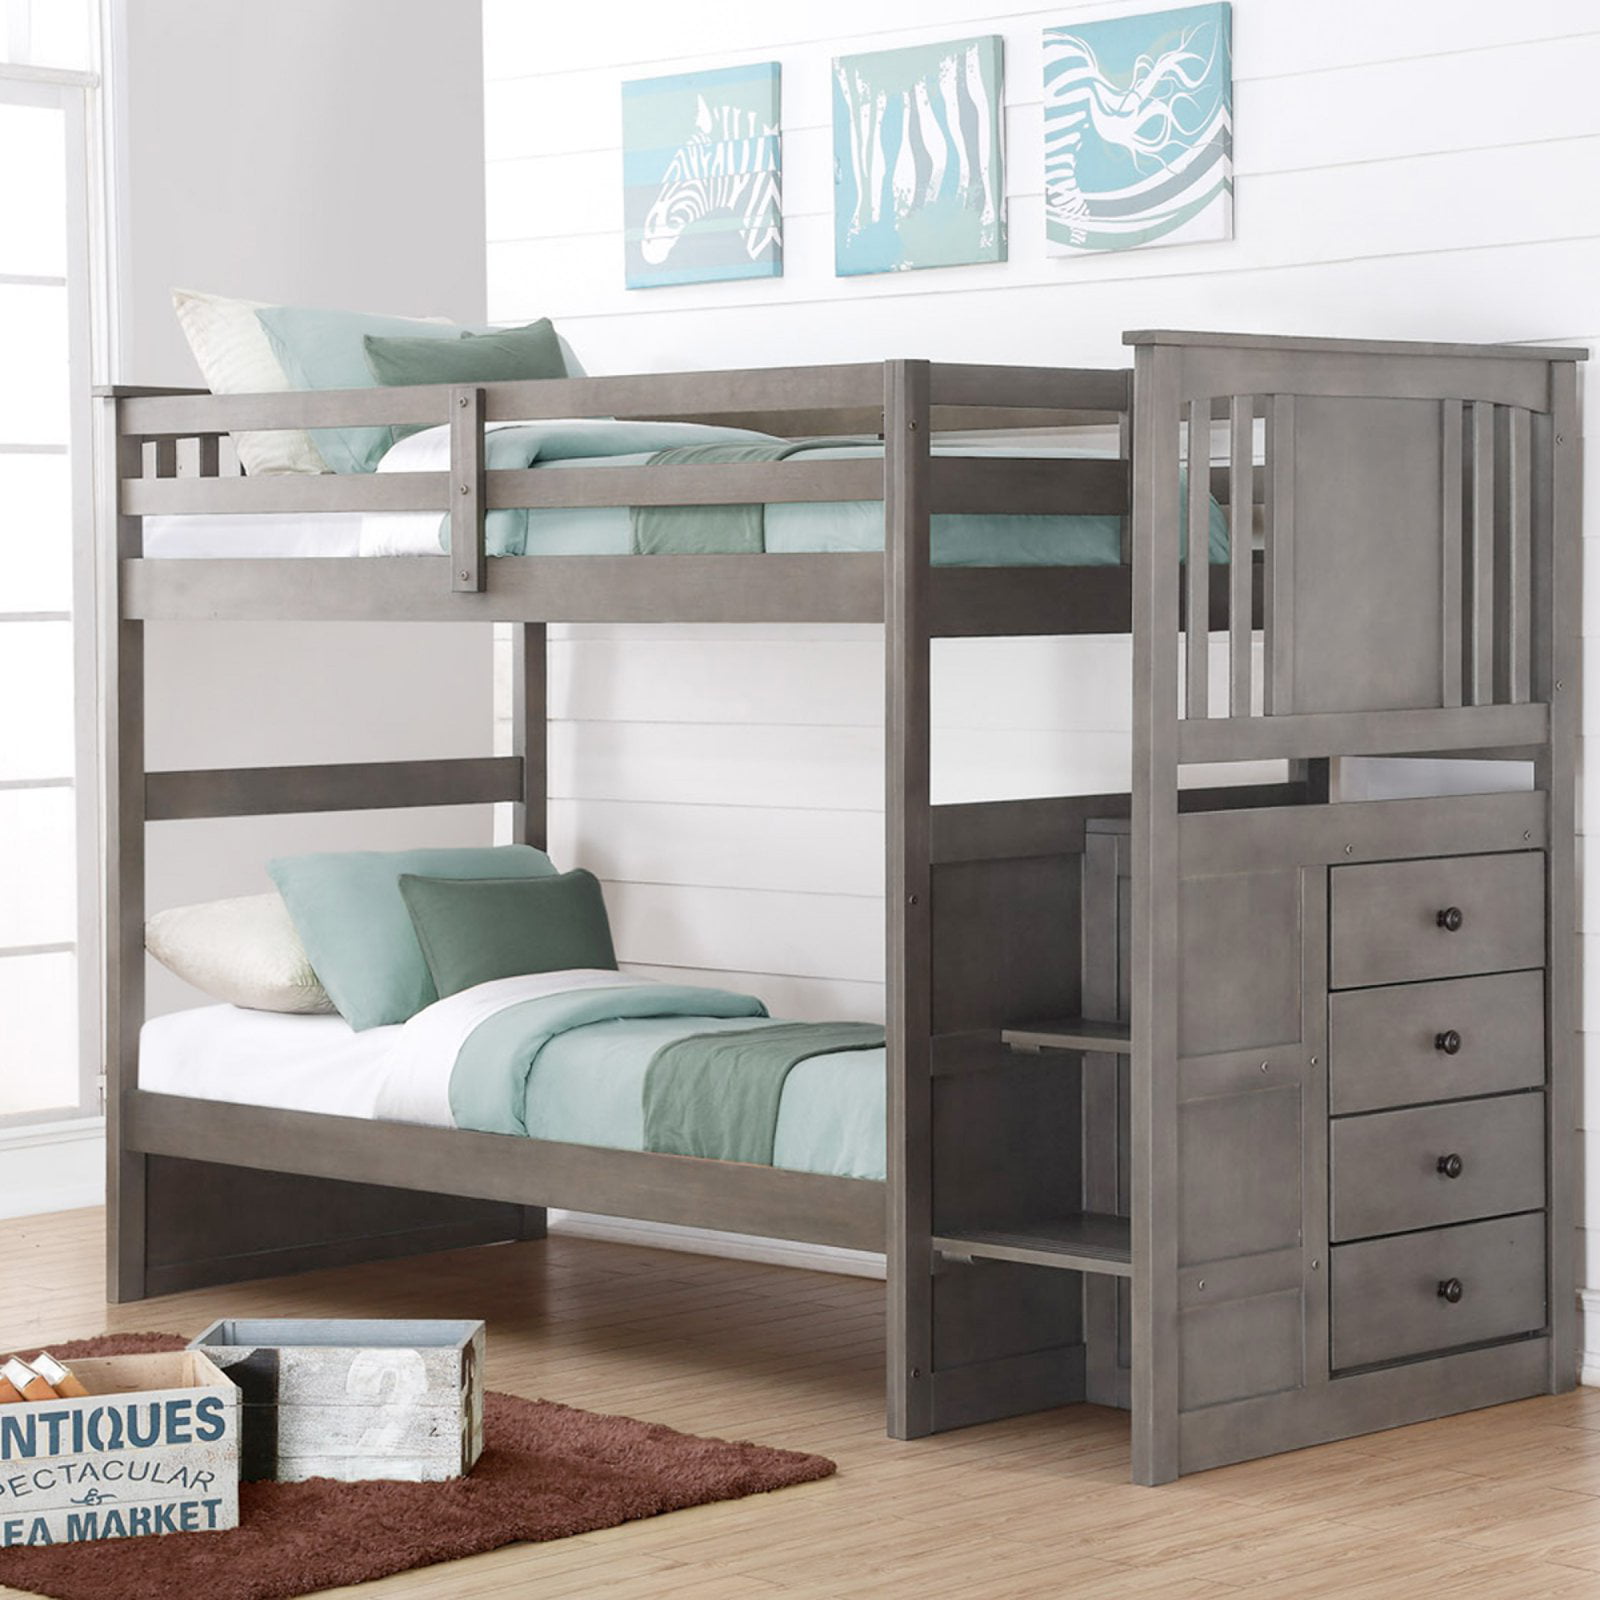 Donco Kids Twin Over Stairway Bunk, Donco Bunk Bed